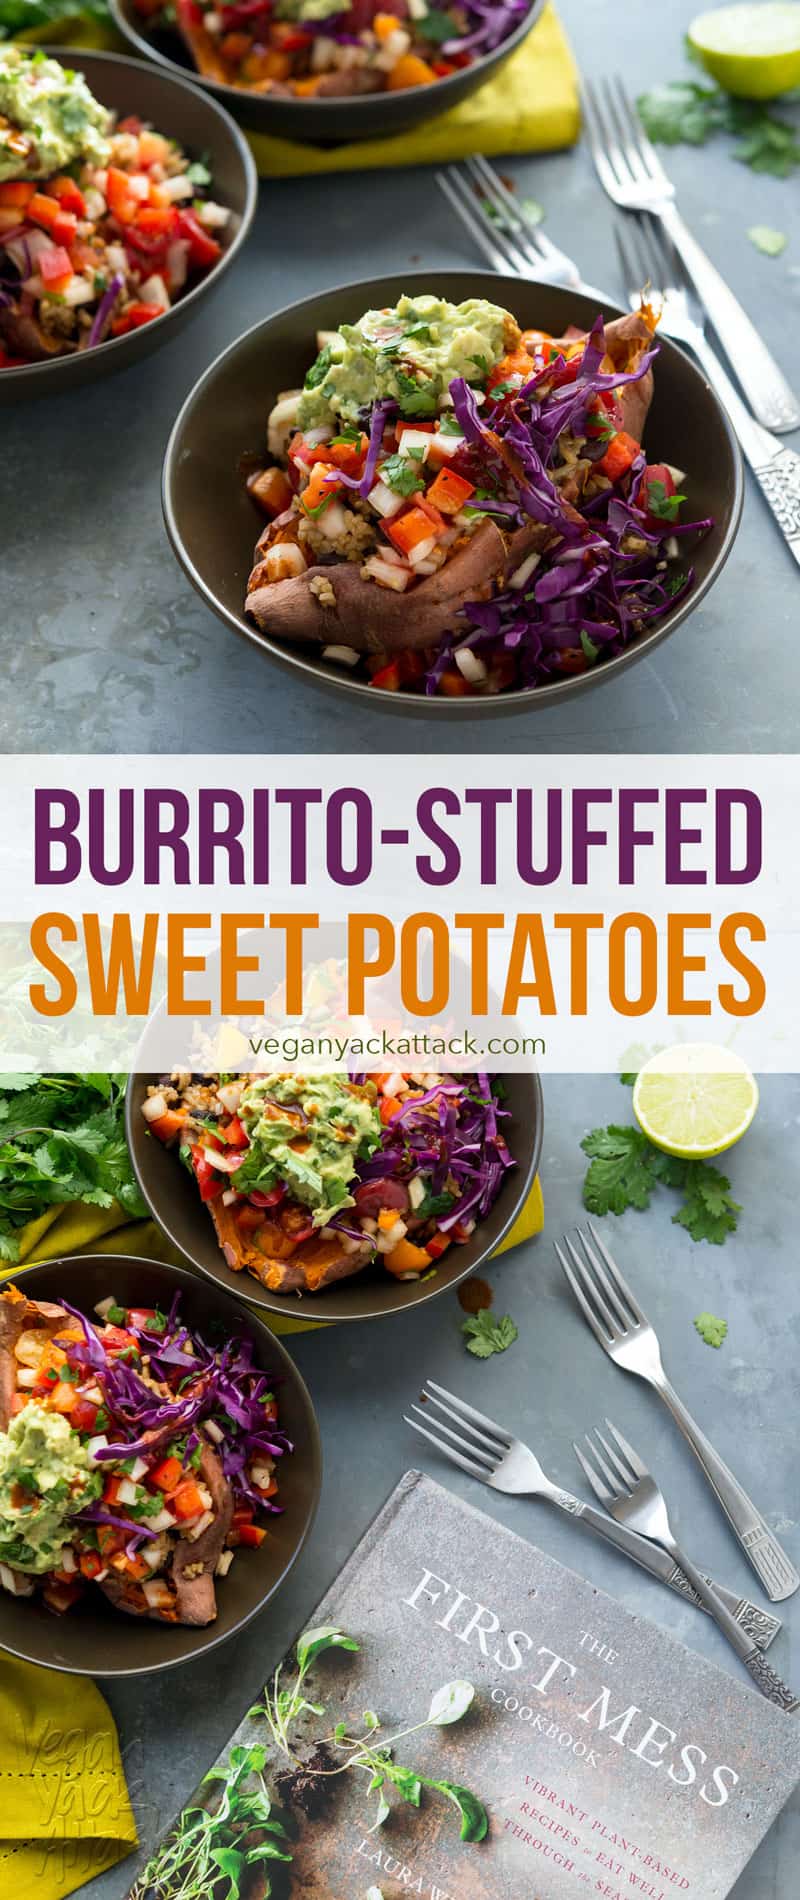 Burrito-Stuffed Sweet Potatoes - Black beans with rice, Rustic salsa and a simple guacamole stuffed inside roasted sweet potatoes! From The First Mess Cookbook #glutenfree #soyfree #giveaway